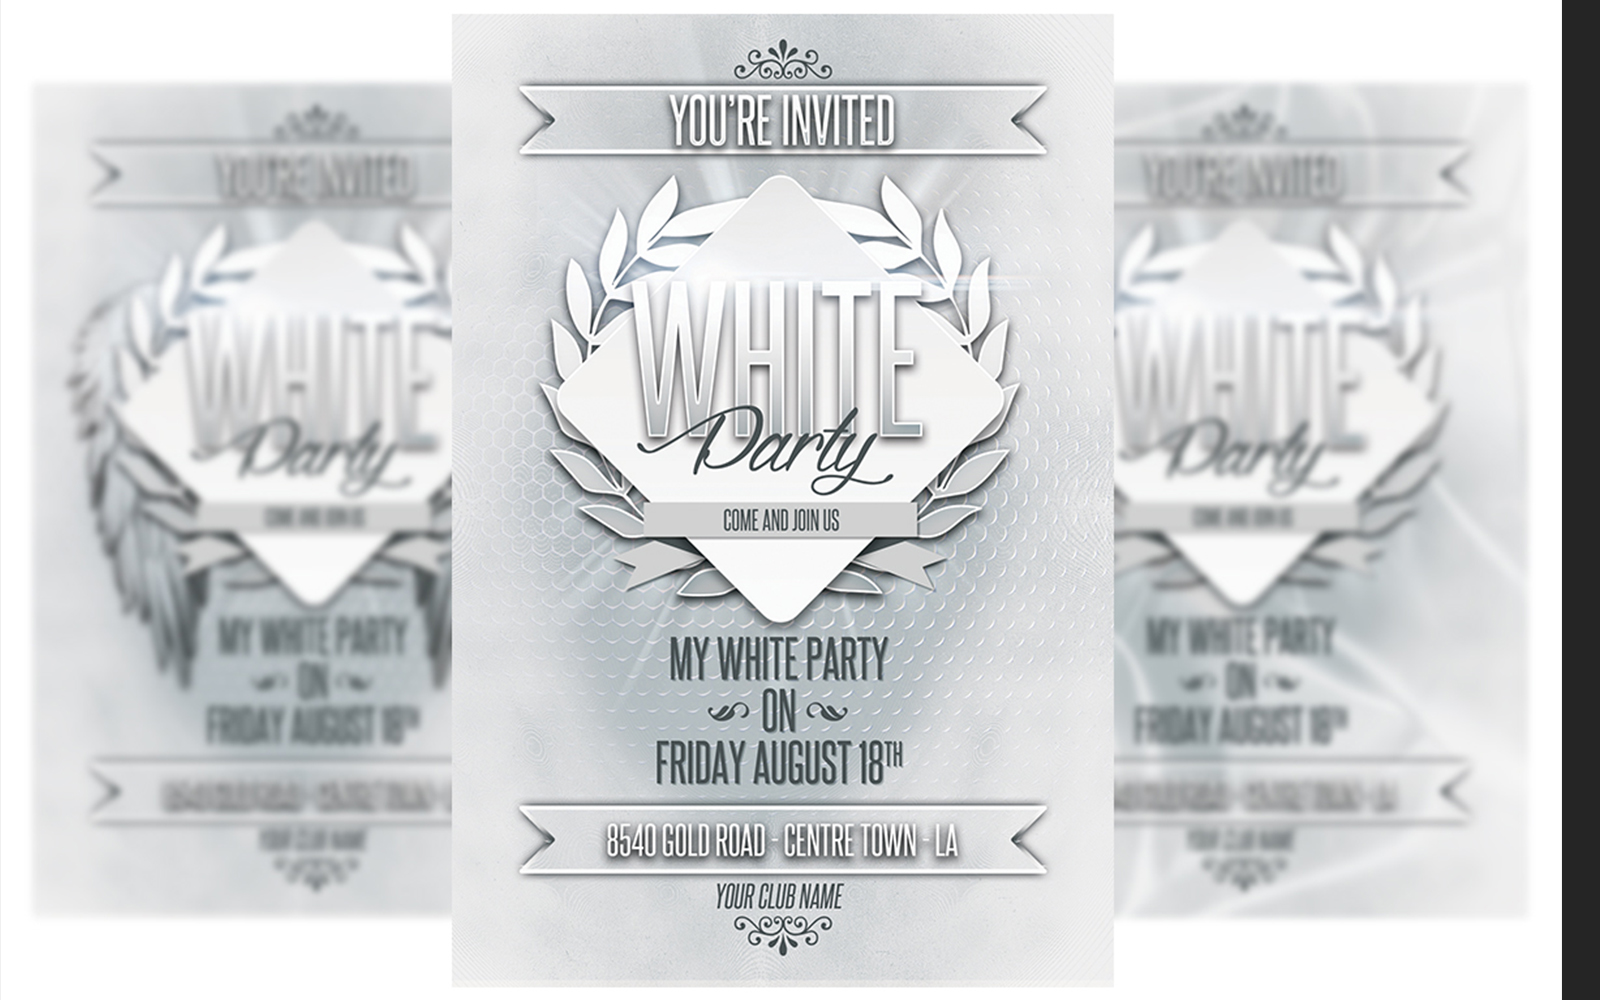 White Party Invitation - Flyer Template